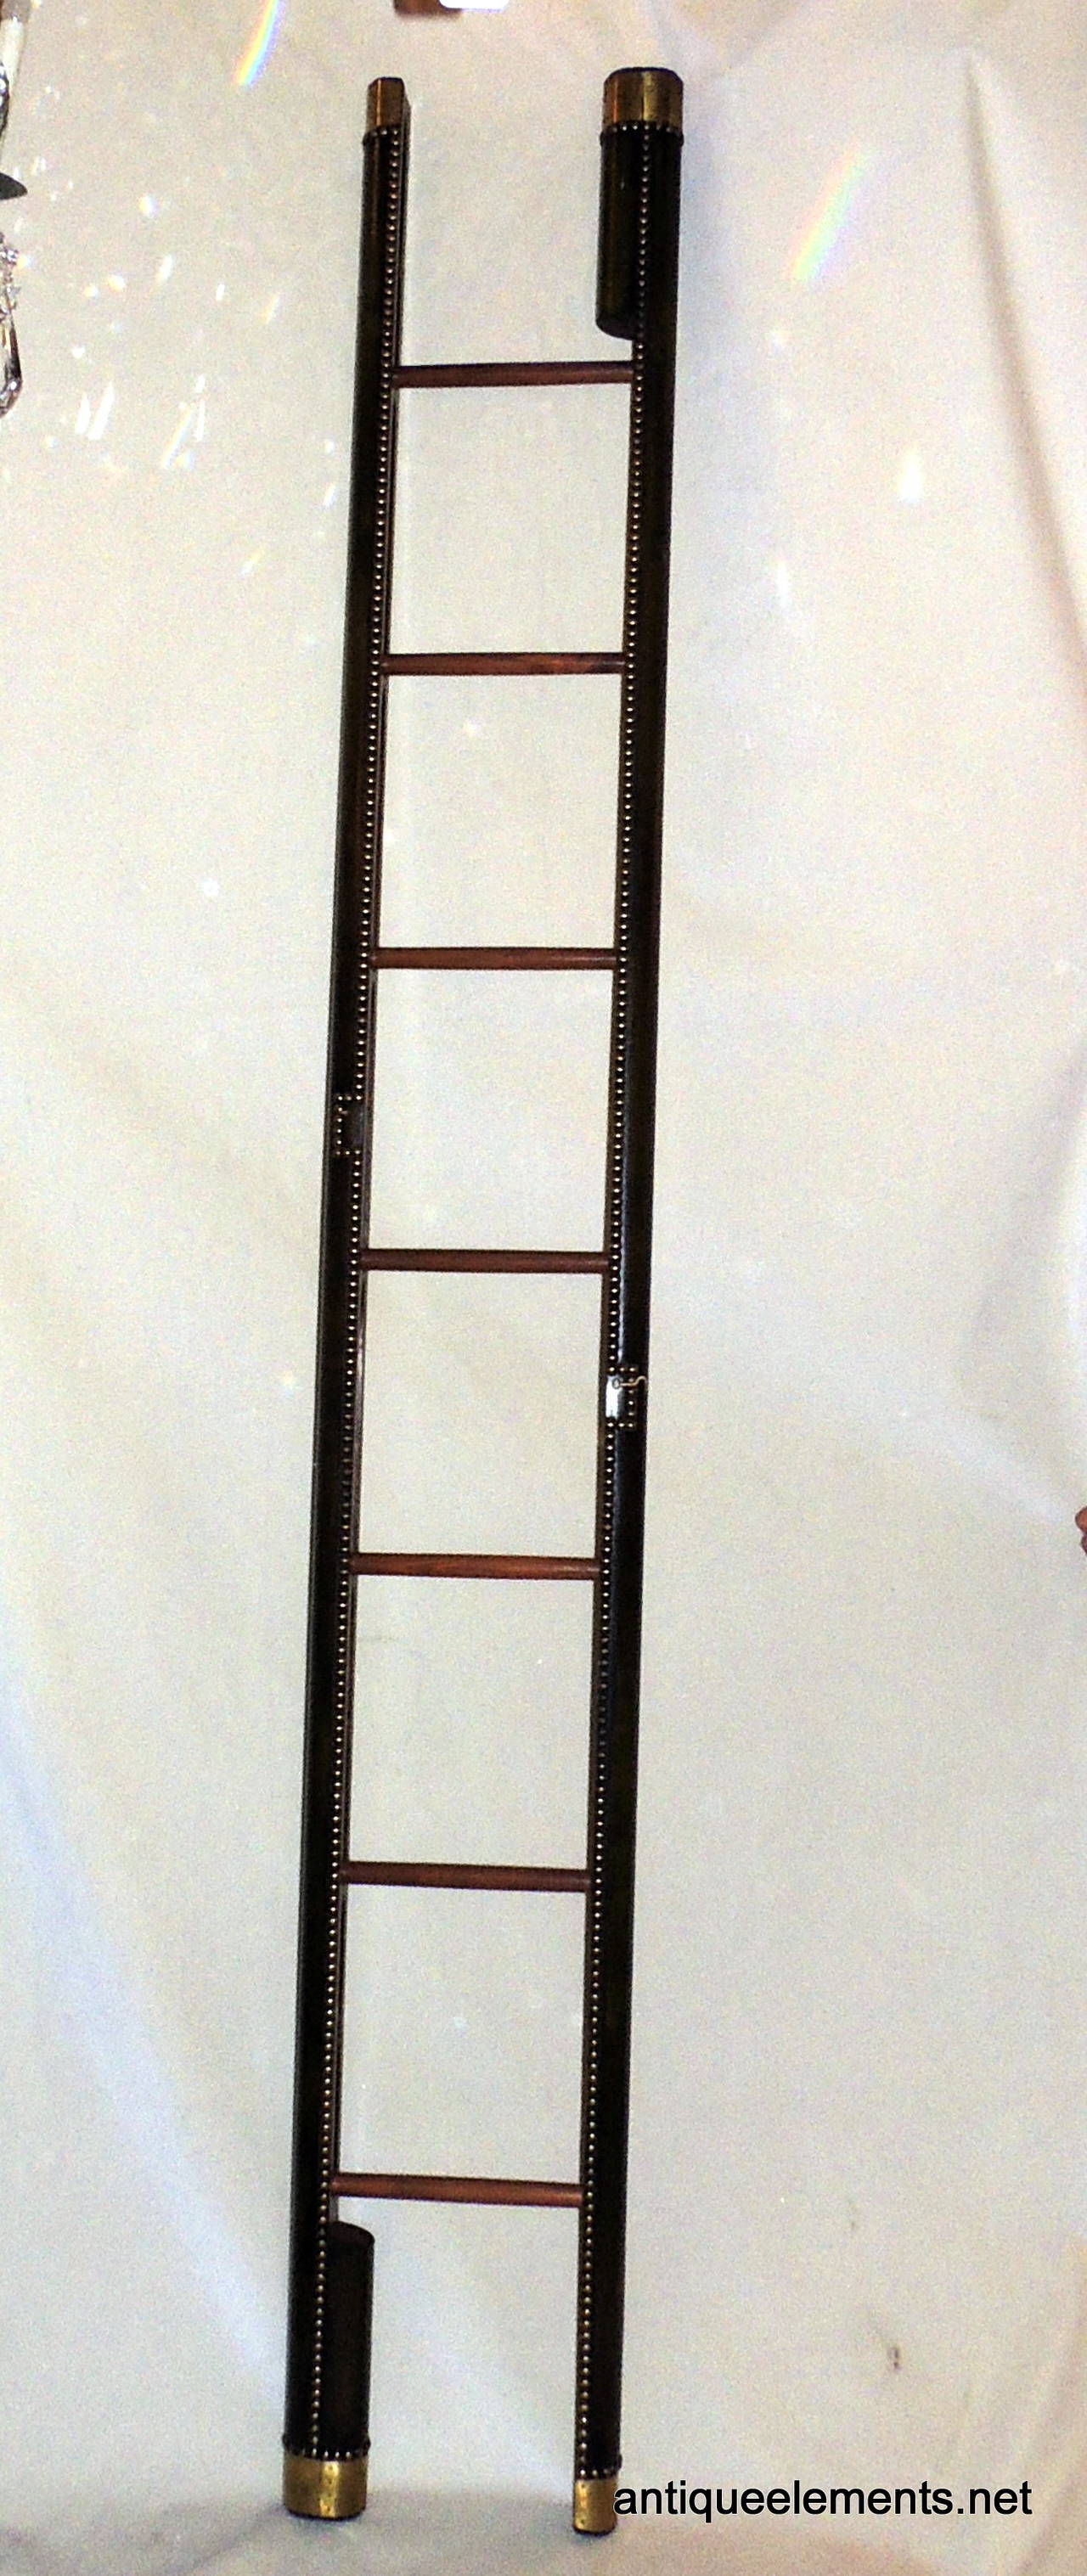 This elegant vintage English folding ladder is made of beautiful mahogany
wood and encased in a rich green leather that is trimmed with brass nailheads, cups and latch which allows it to be stored in a narrow space.

Measure: Closed 10" H x